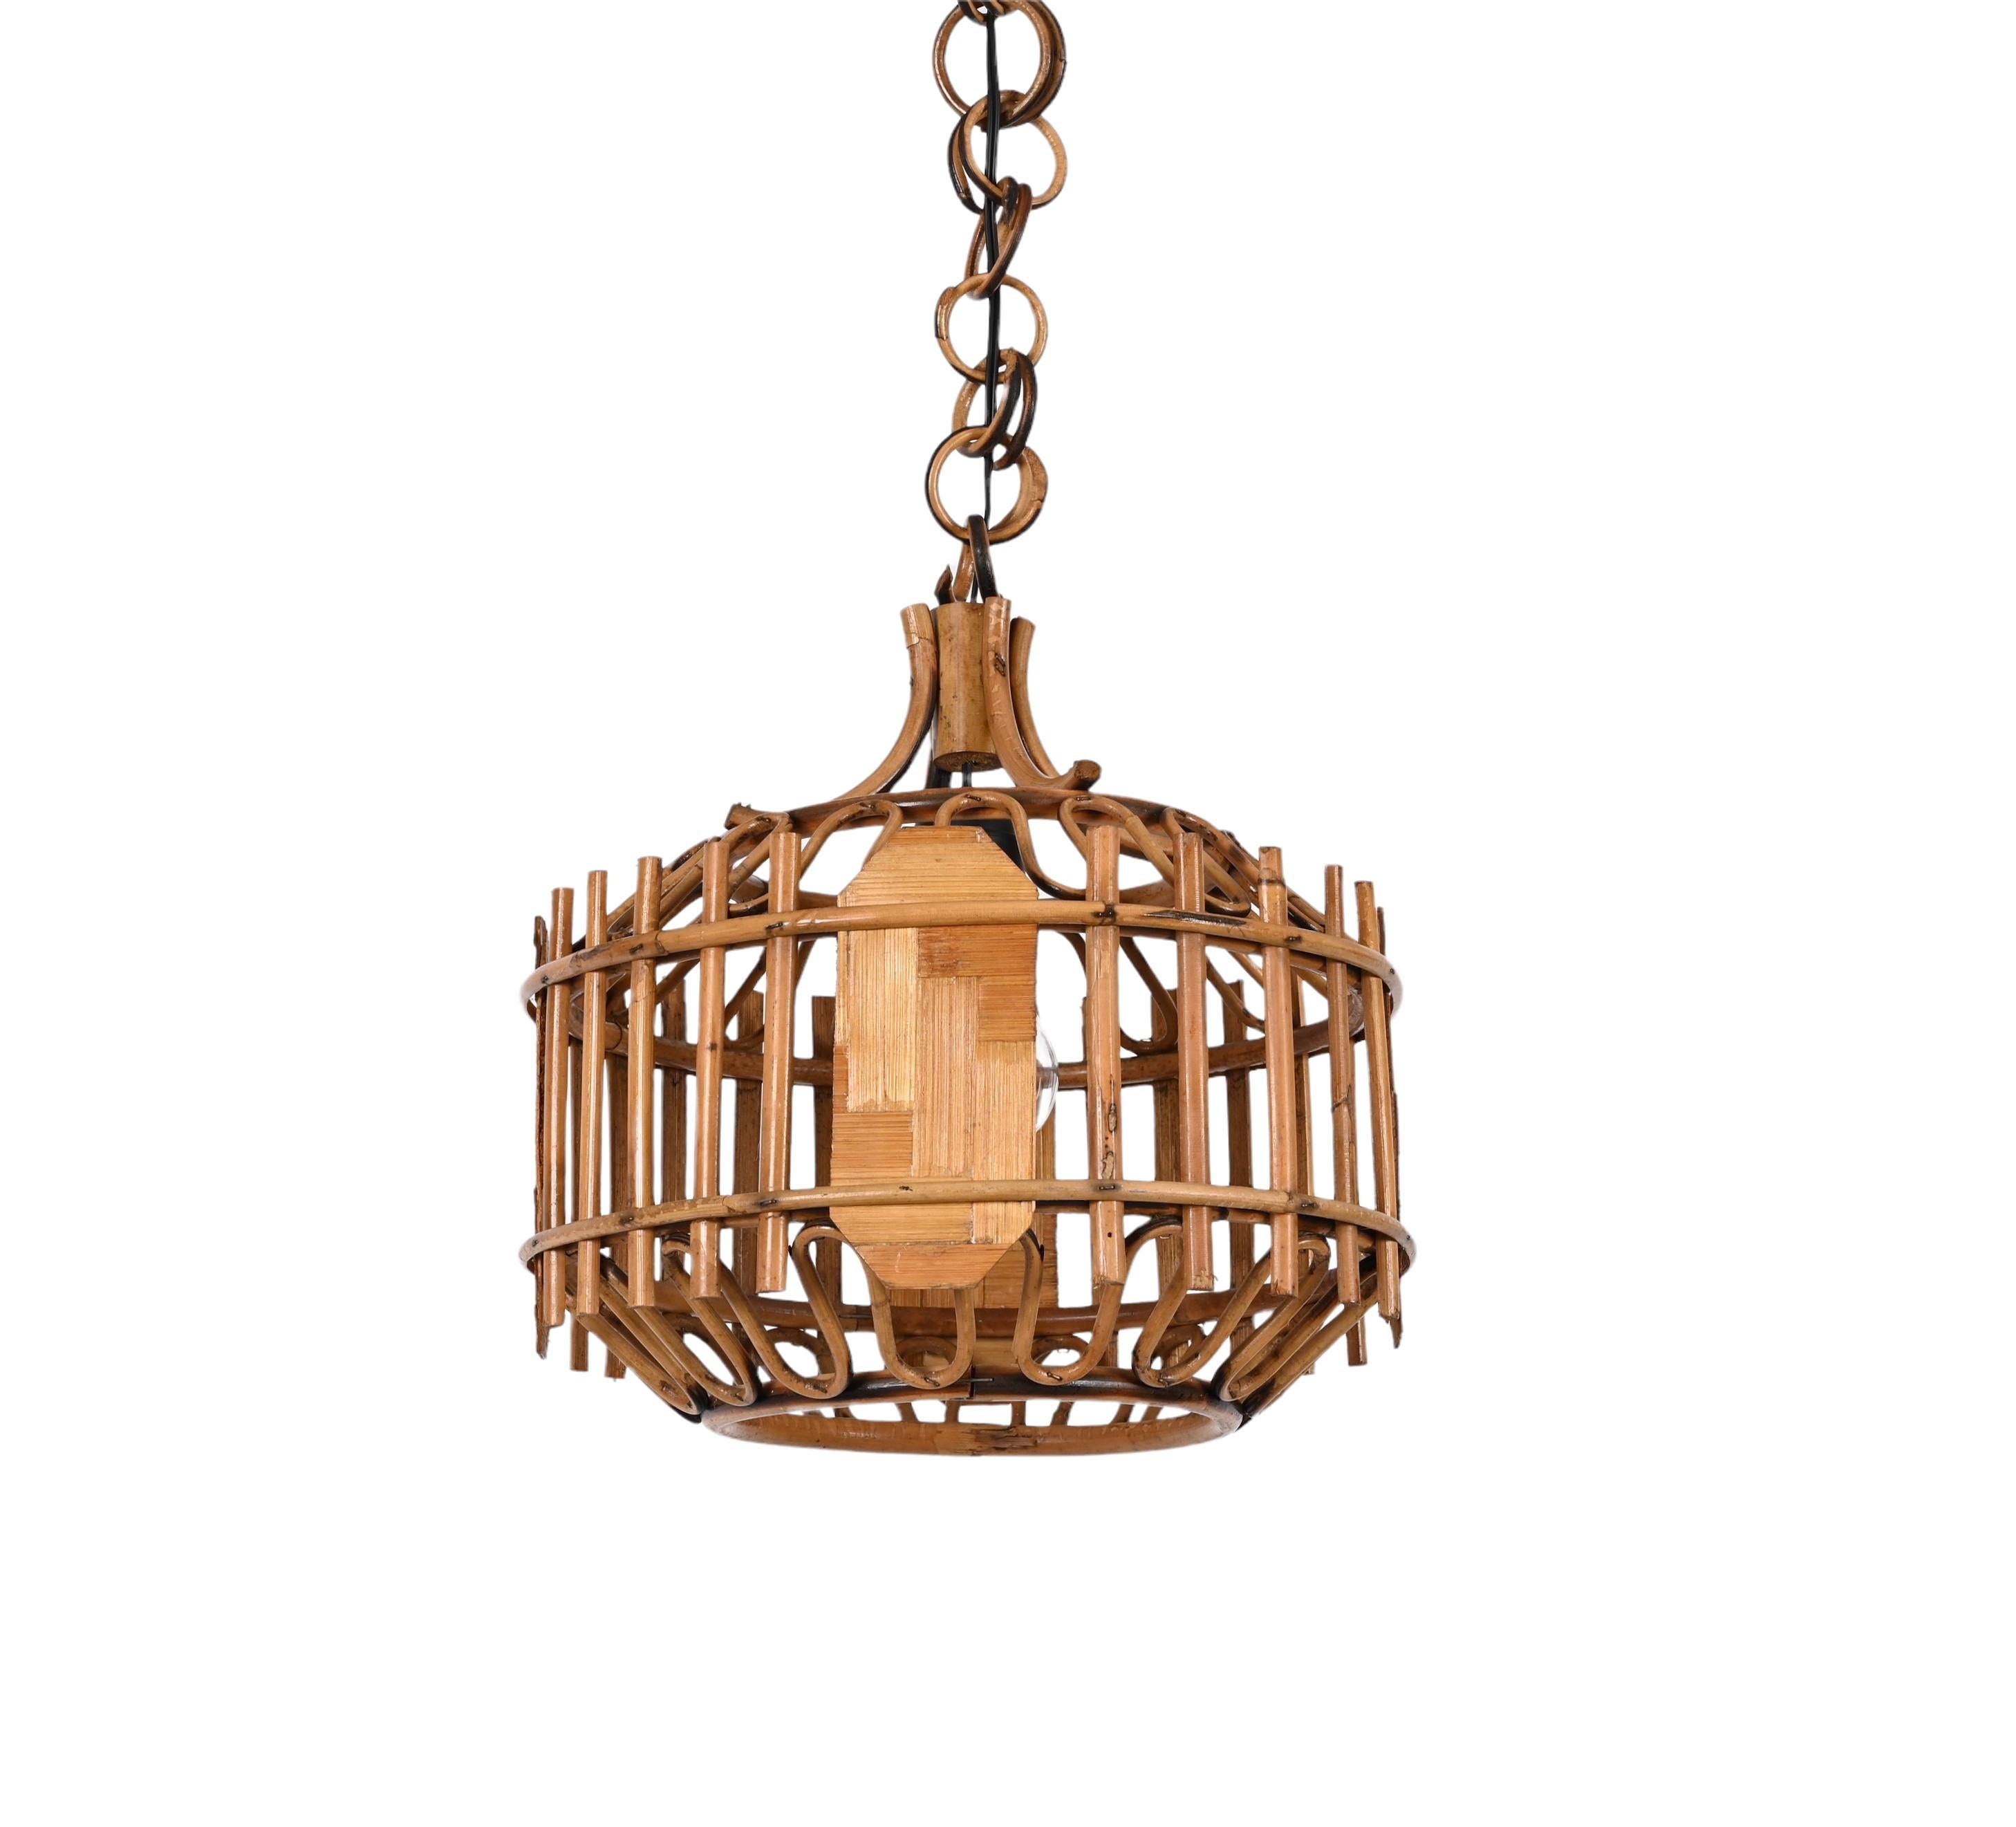 Midcentury French Riviera Bambo and Rattan Rounded Italian Chandelier, 1960s For Sale 1